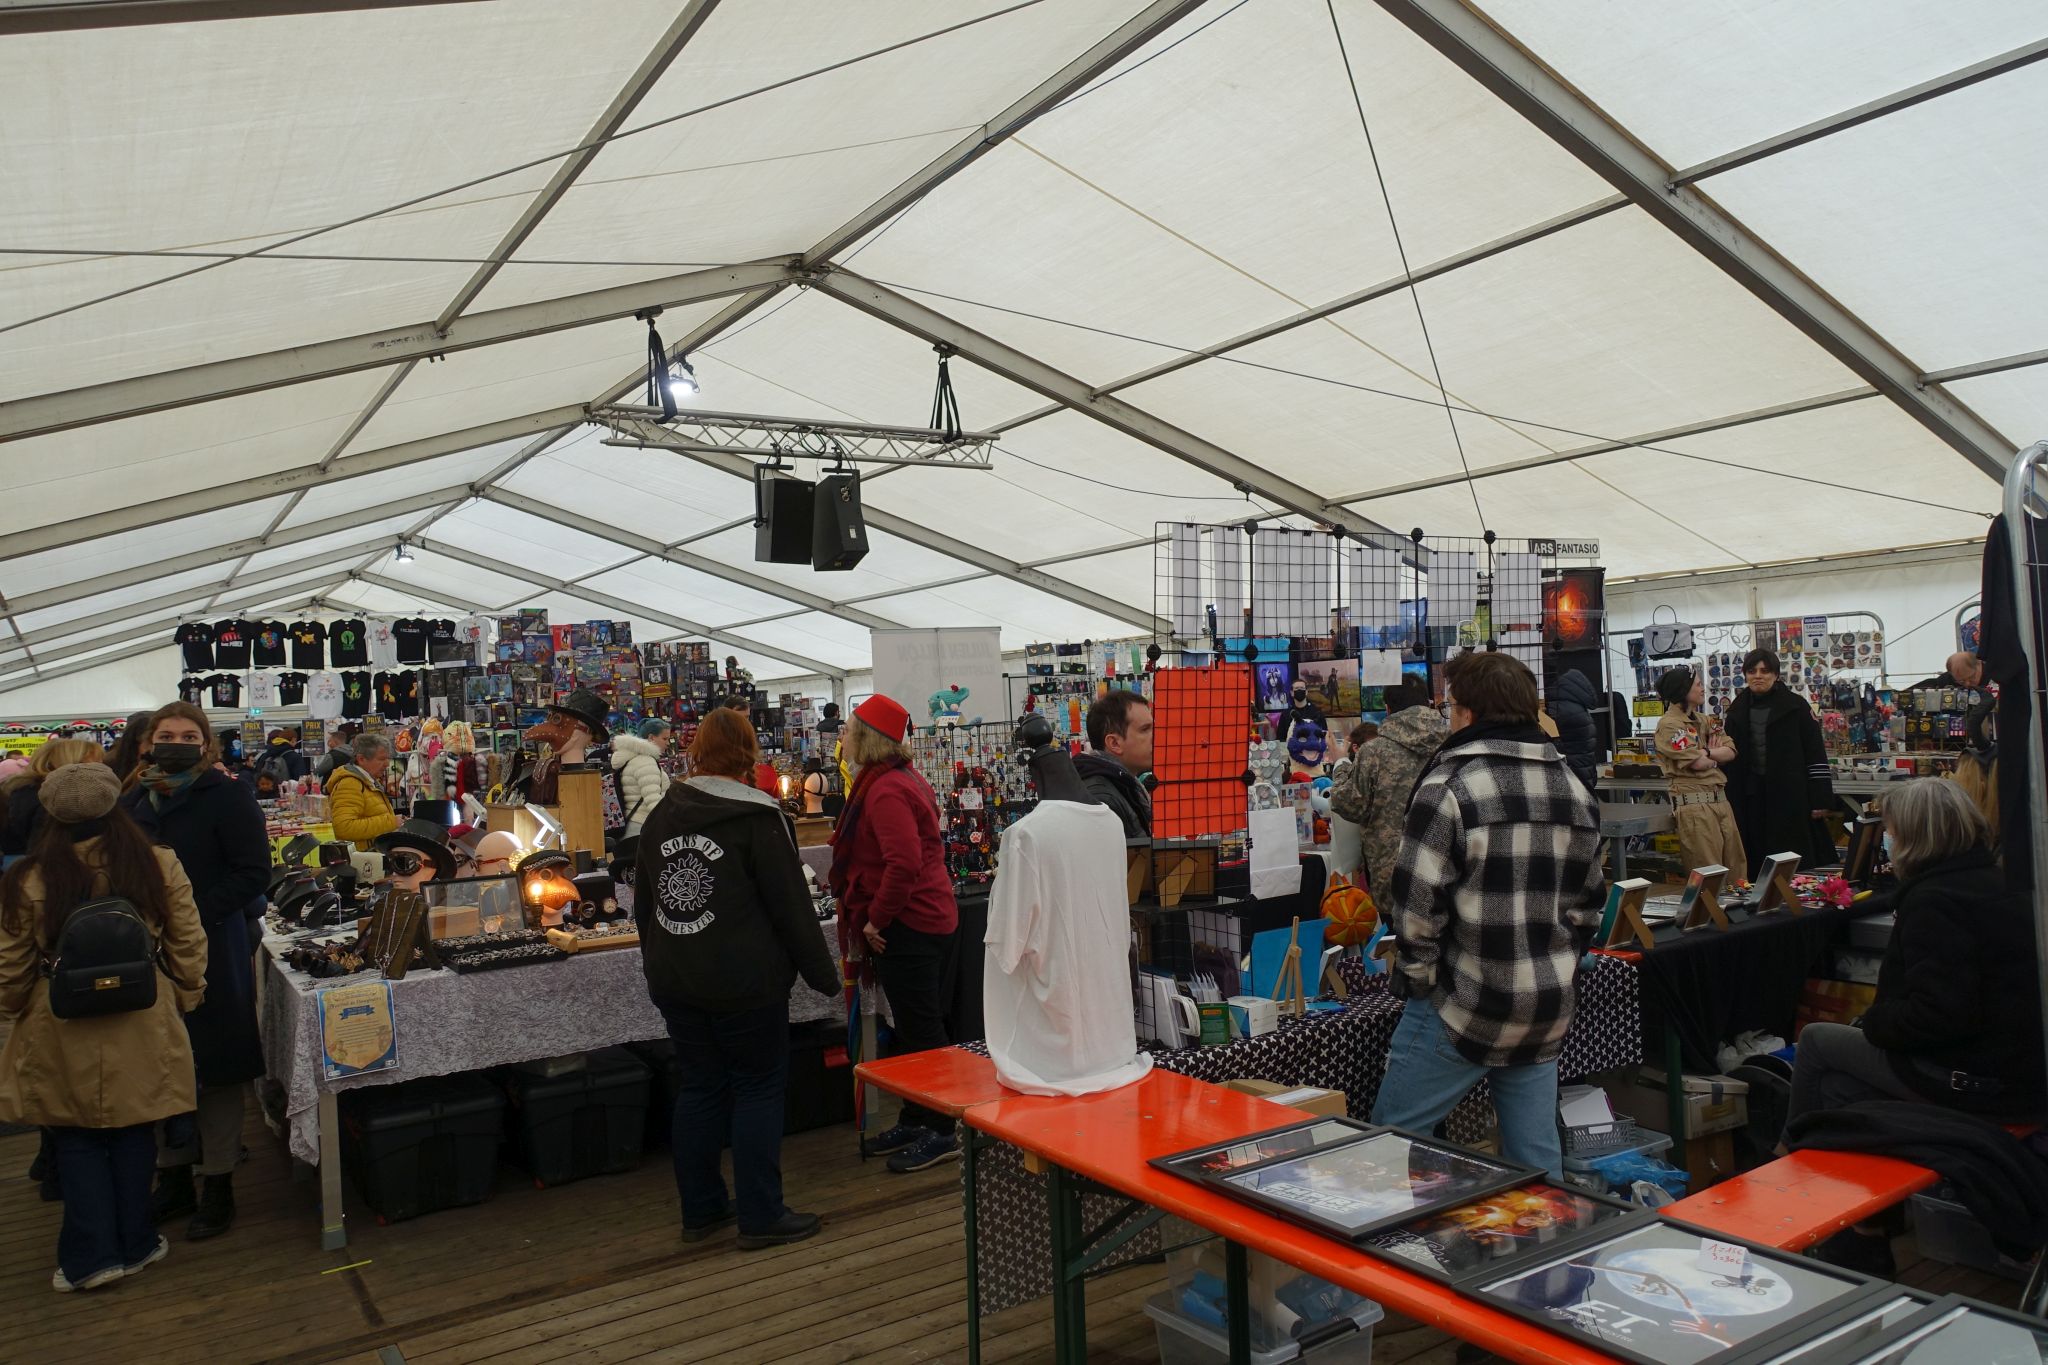 Interior of the tent with many dealers tables and some people.